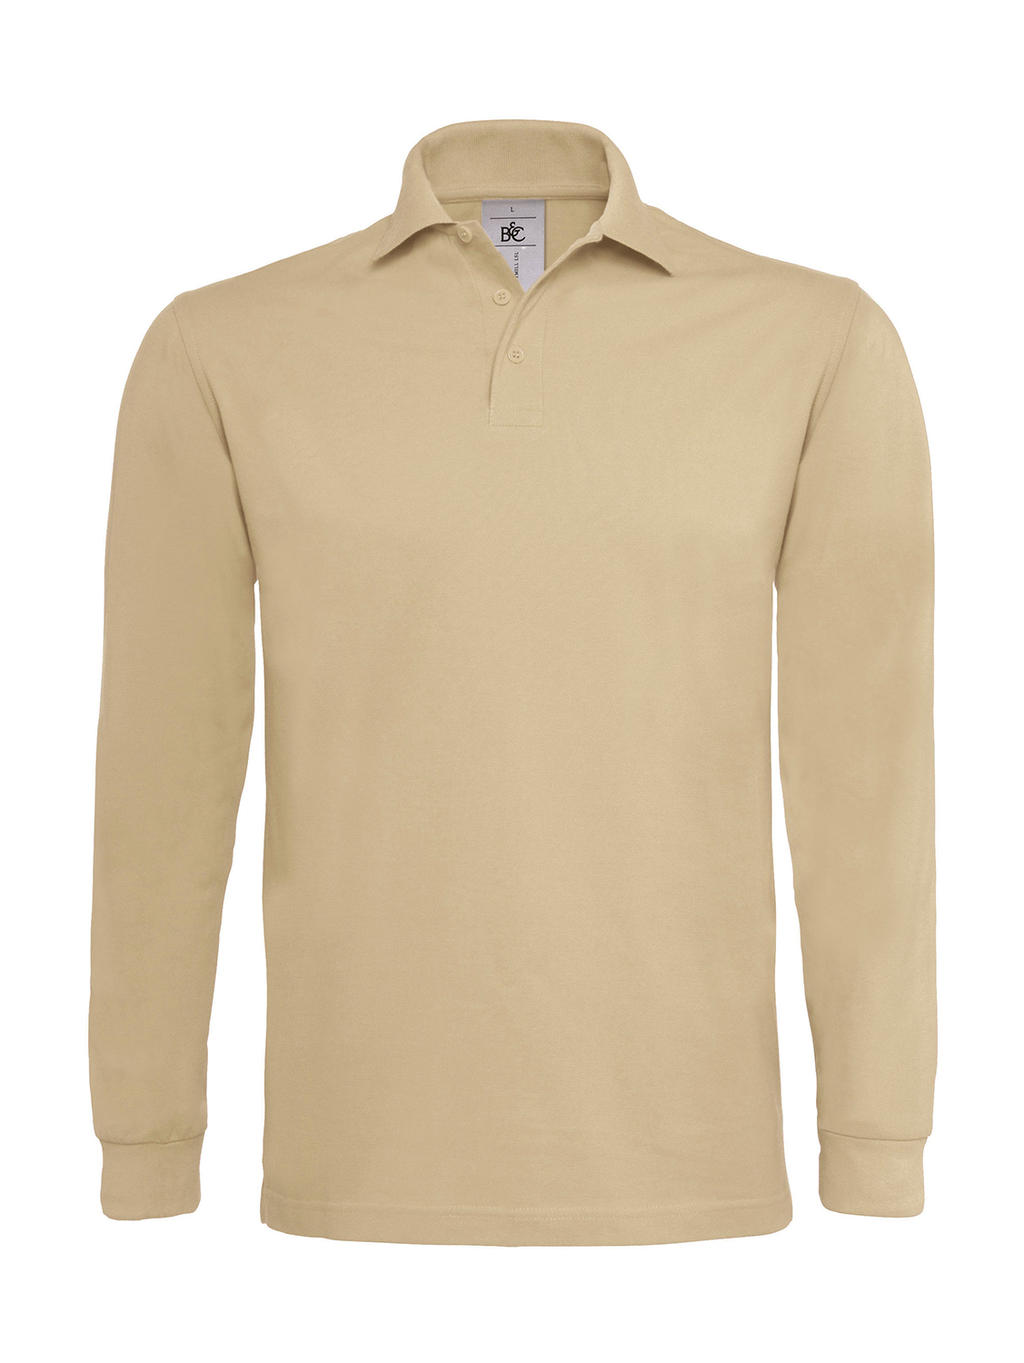  Heavymill LSL Polo in Farbe Sand